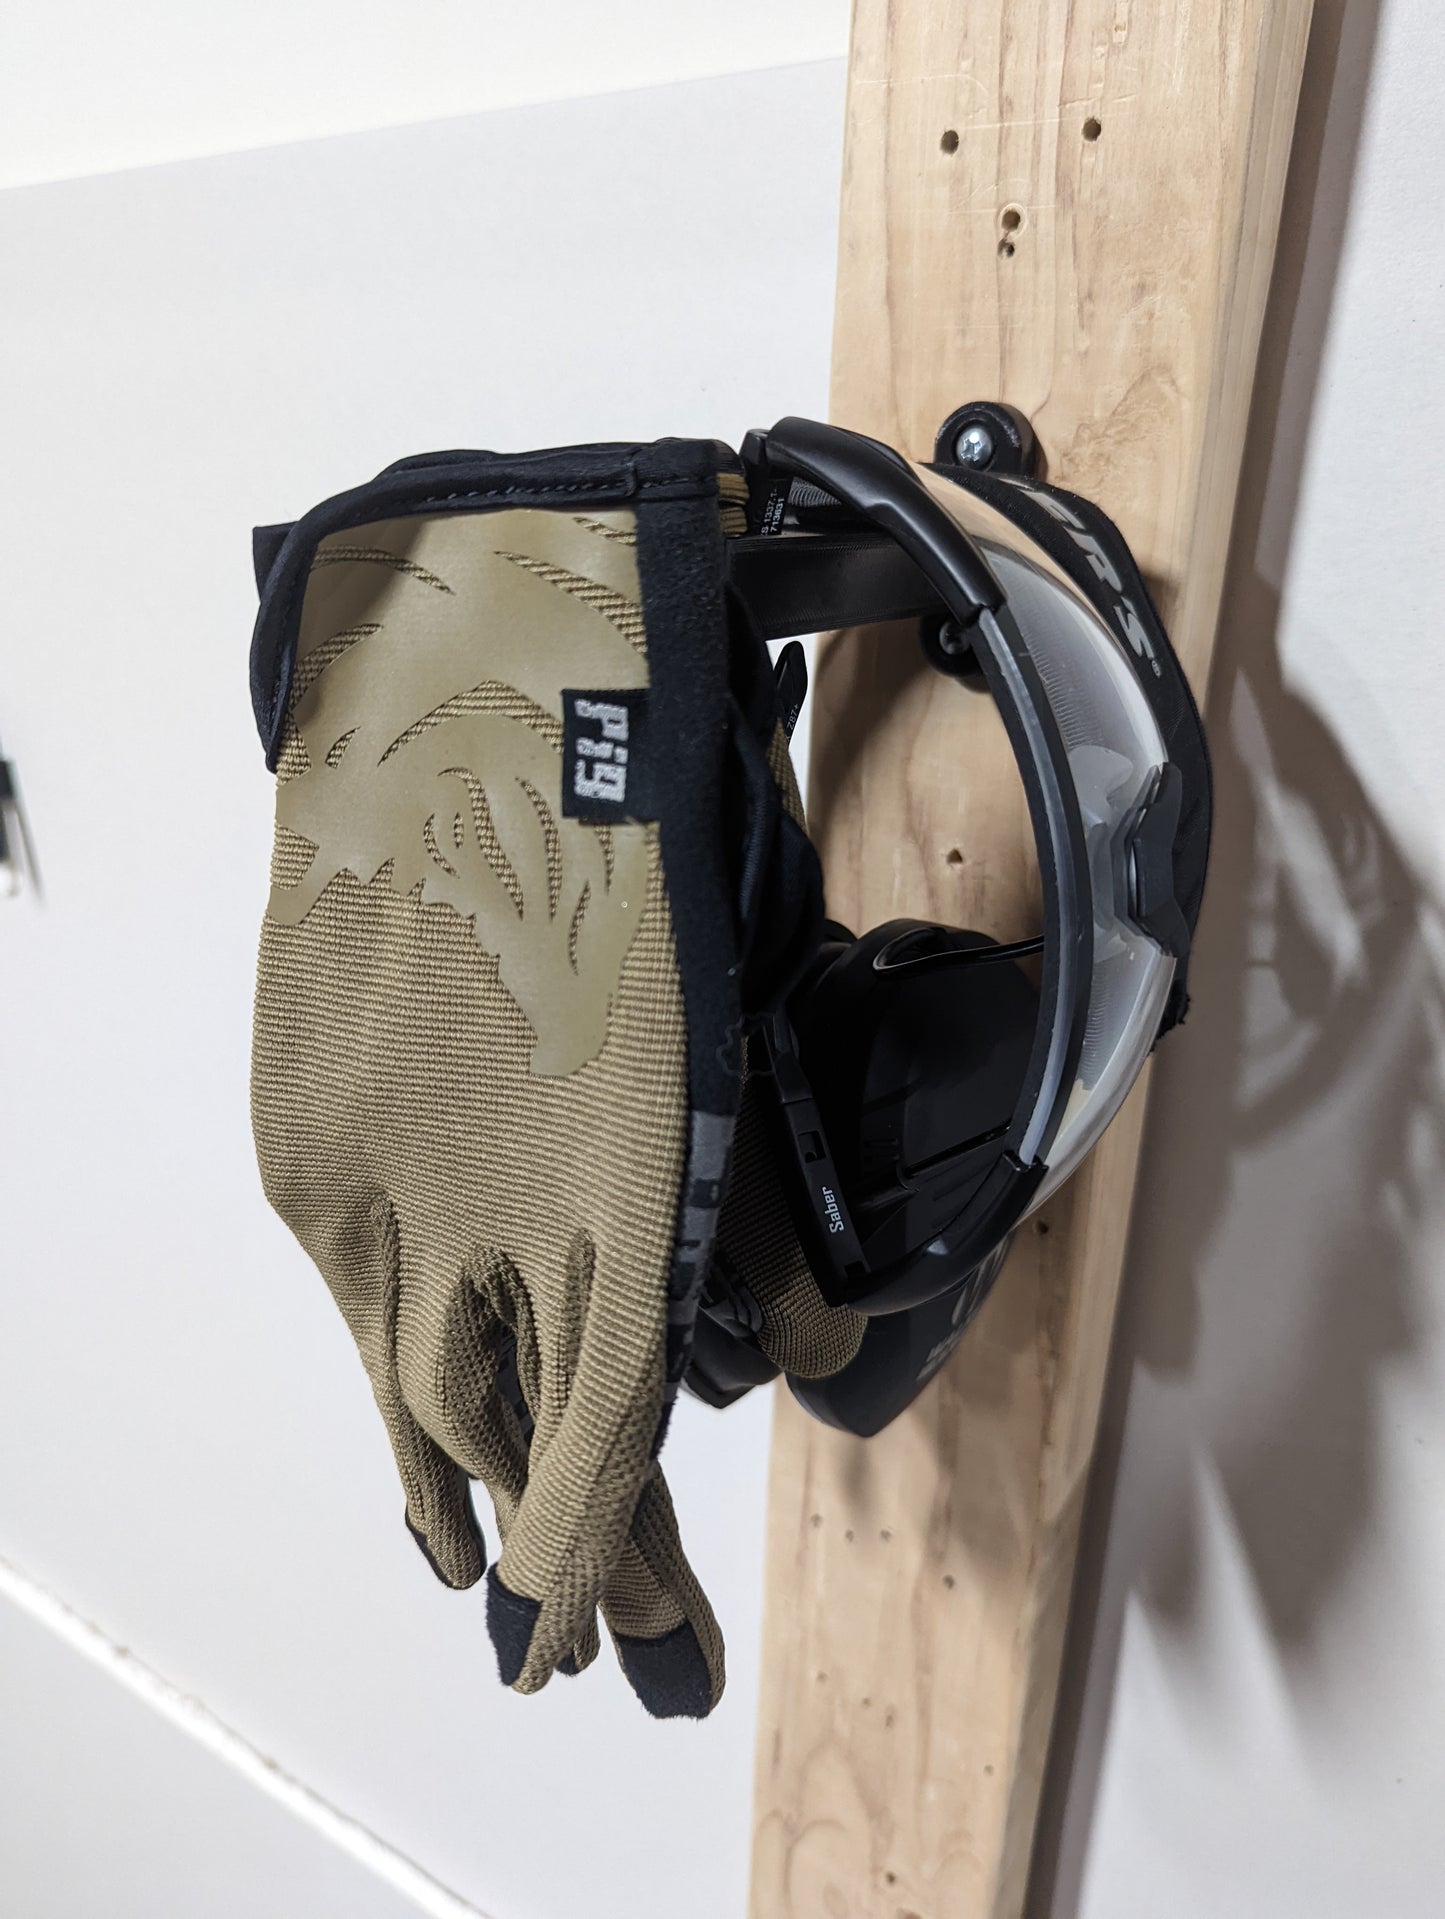 Ear Pro, Glasses, and Gloves Mount - Wall | Gear Holder Storage Rack